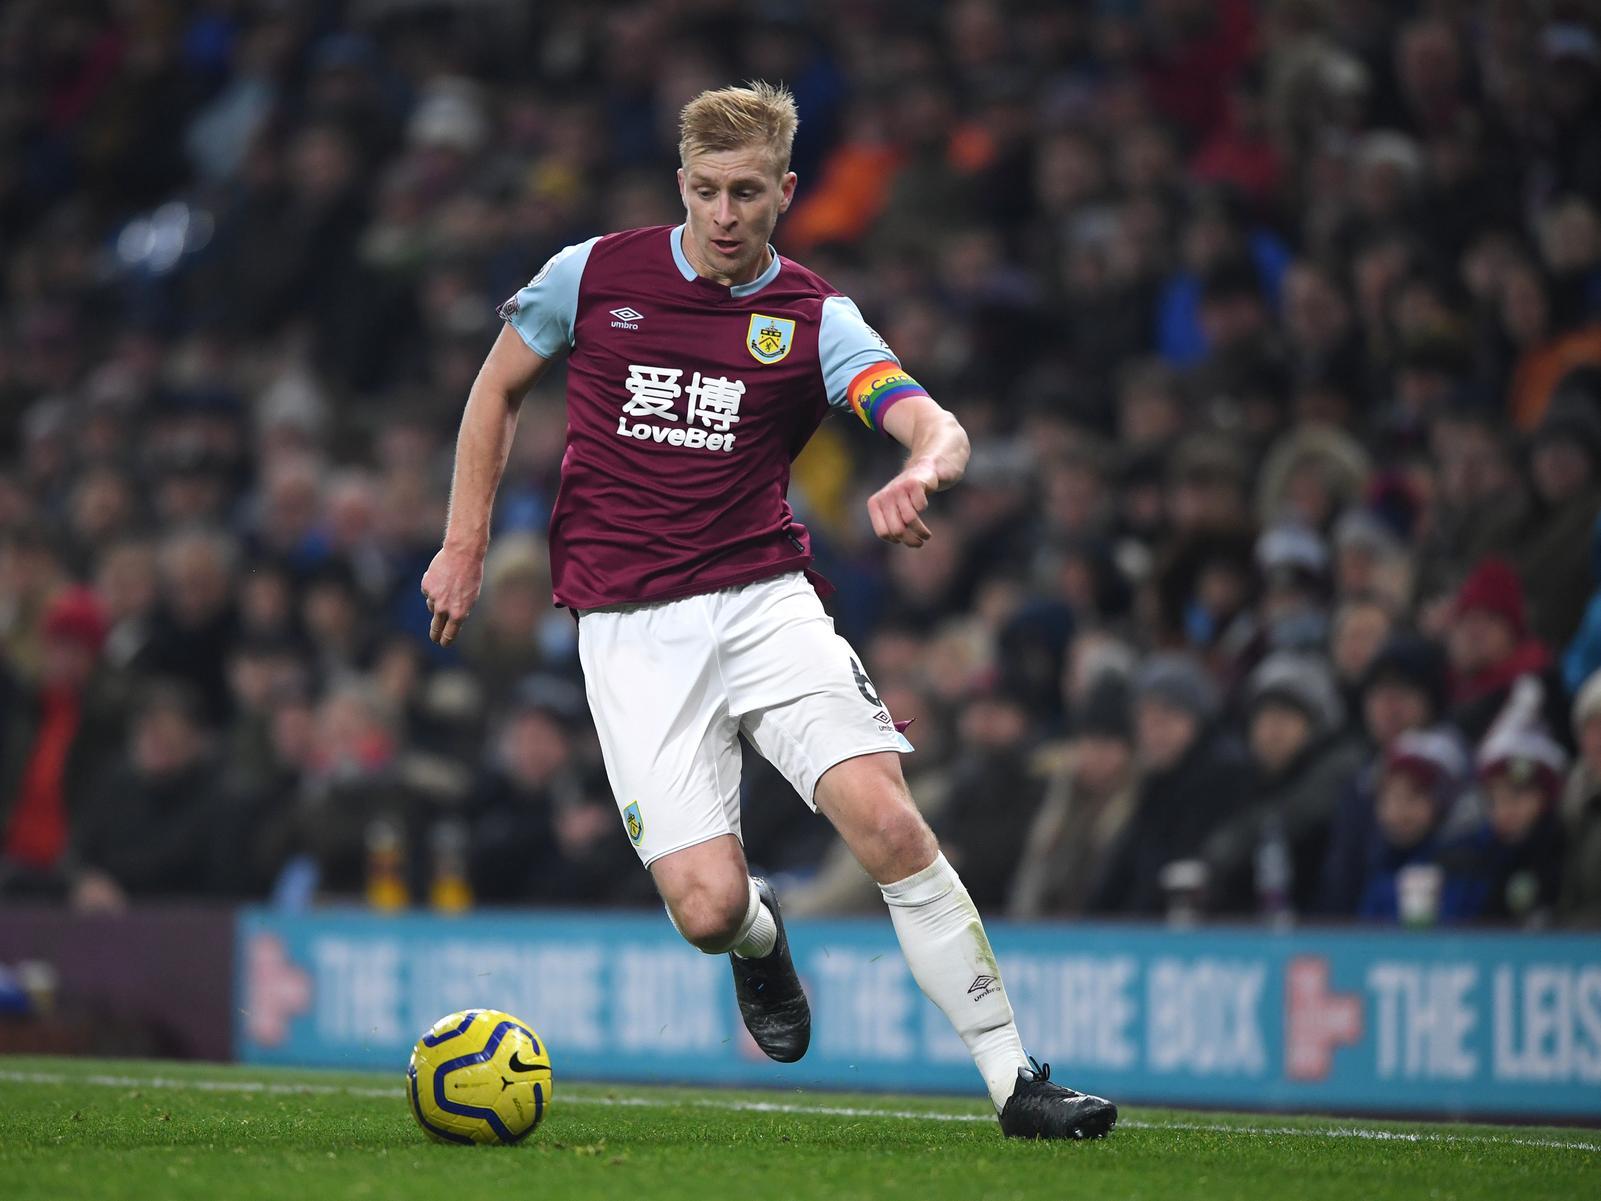 A solid display from the Clarets skipper, throwing himself into everything that was fired into his vicinity. Beaten for pace in the one-on-ones on occasions, failing to get to Callum Wilson when the visitors broke in the second half, but very good on the whole.